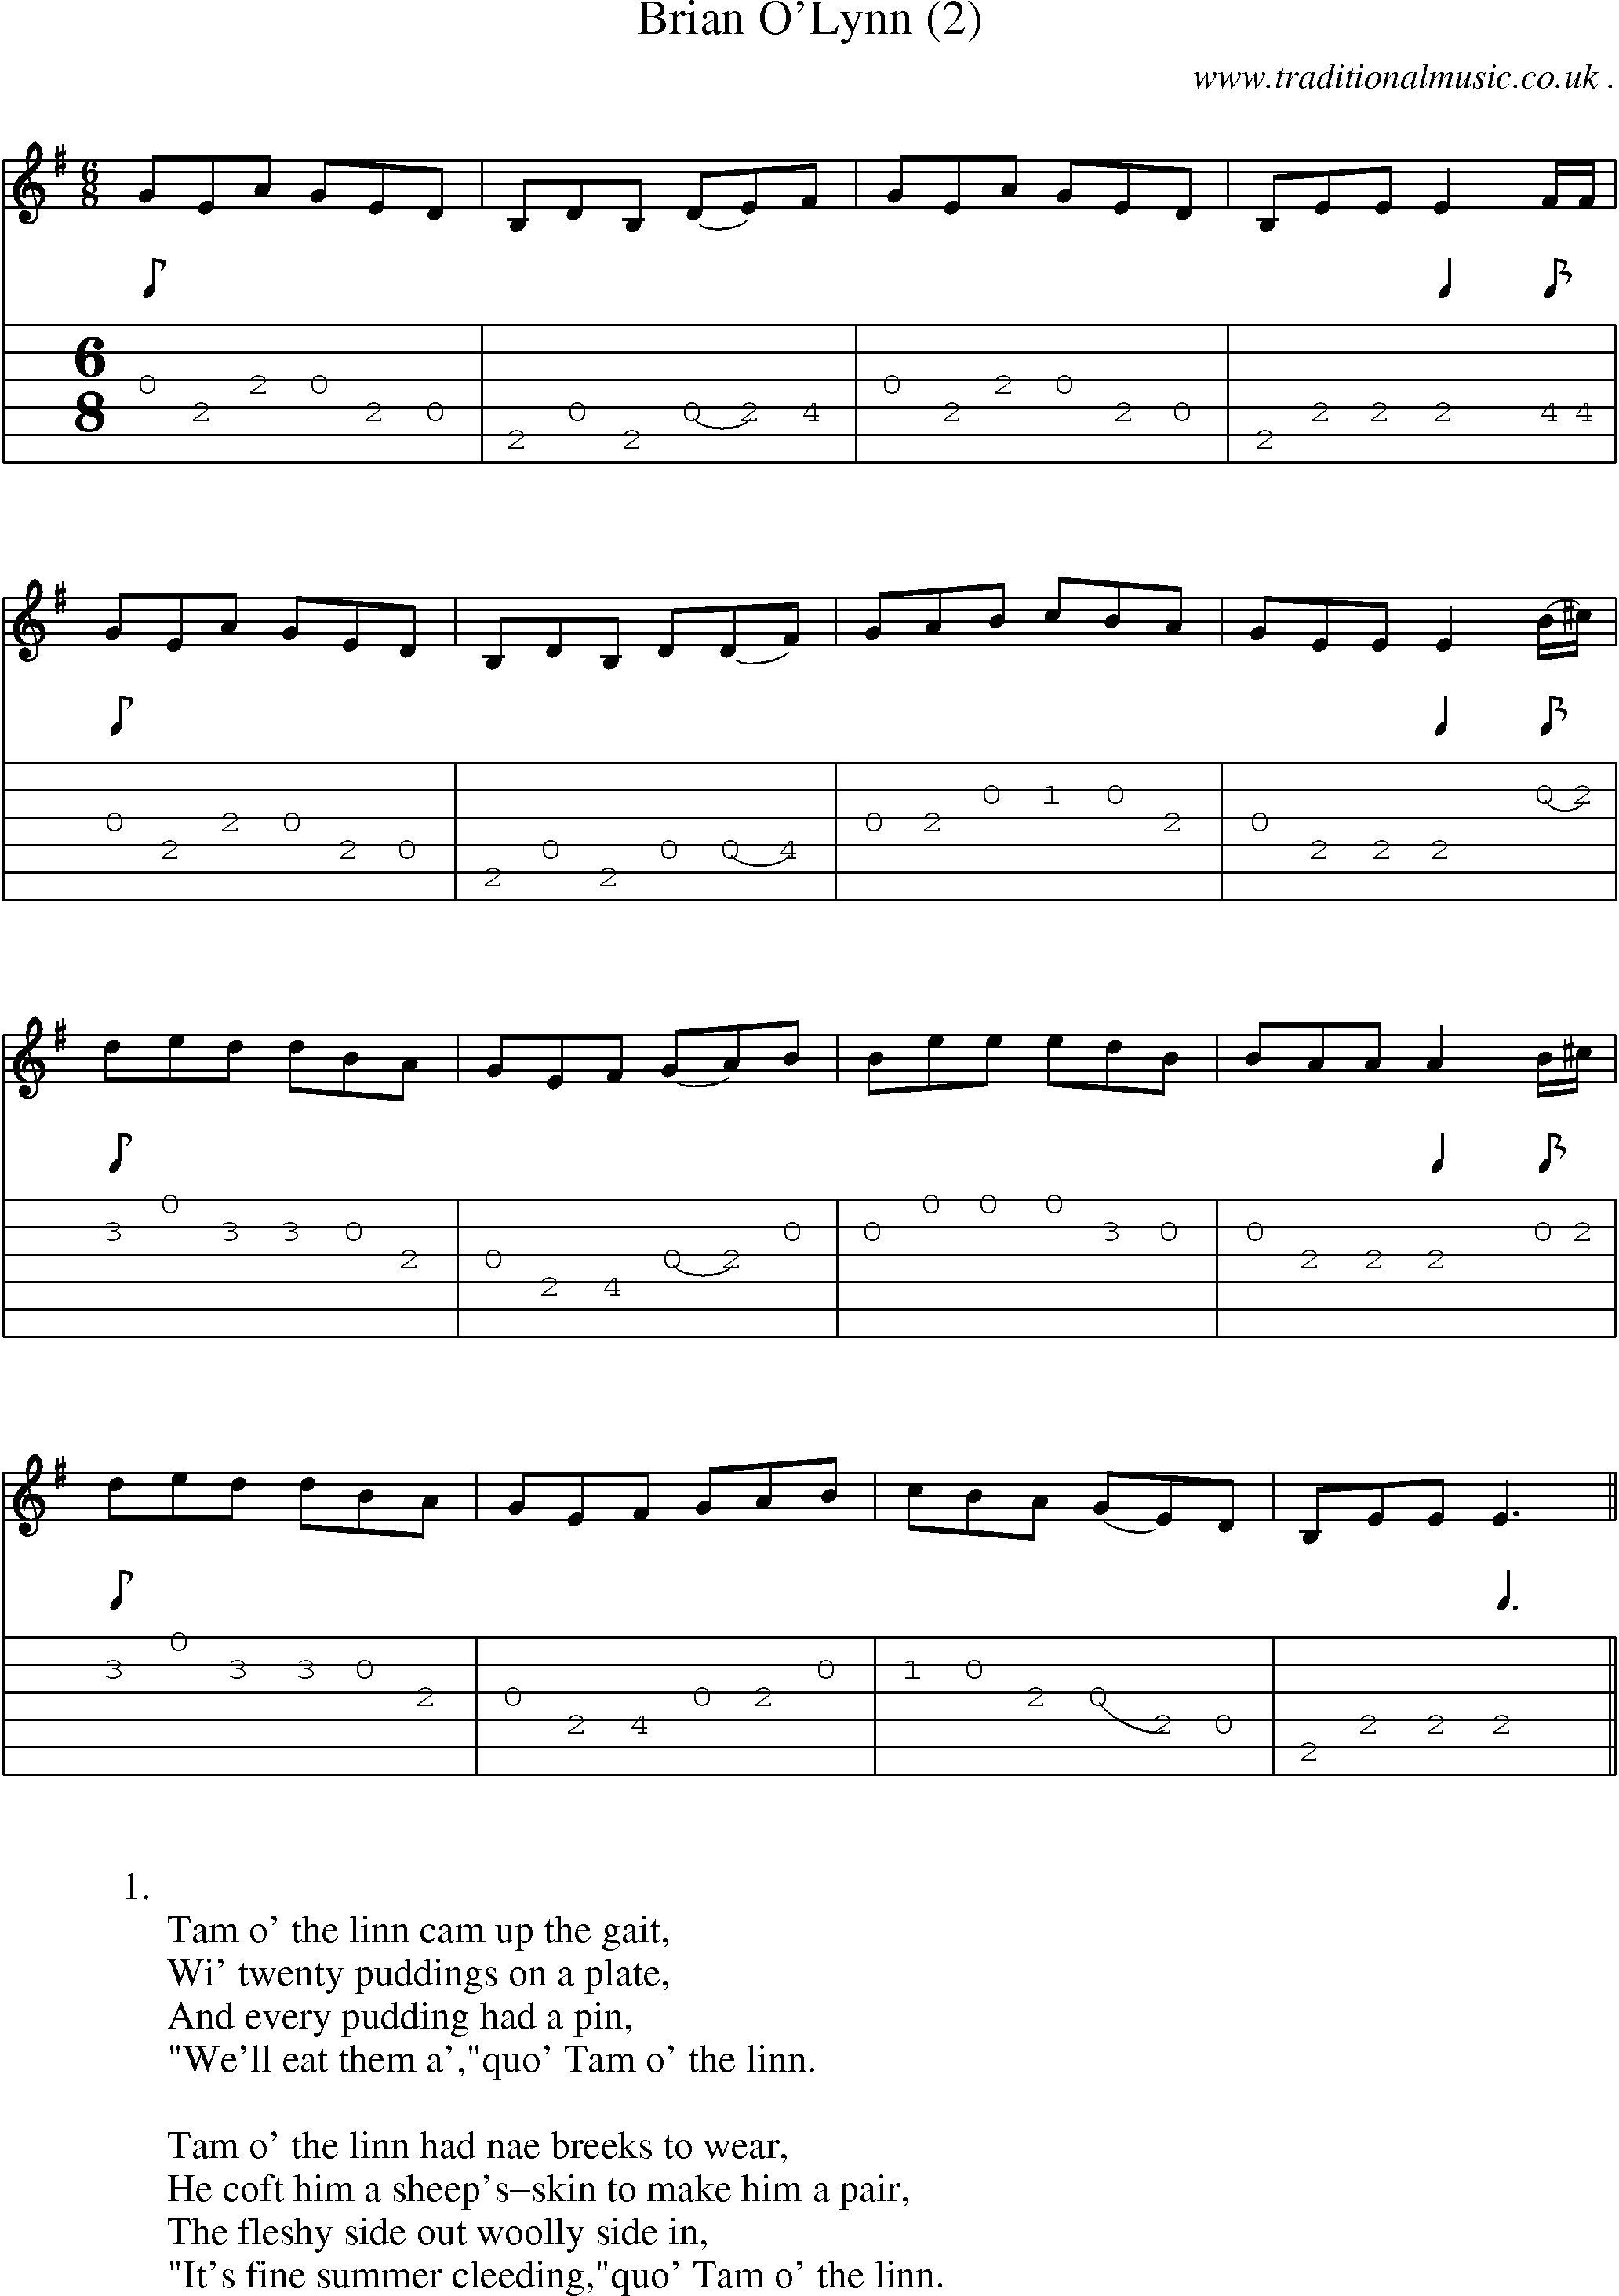 Sheet-Music and Guitar Tabs for Brian Olynn (2)